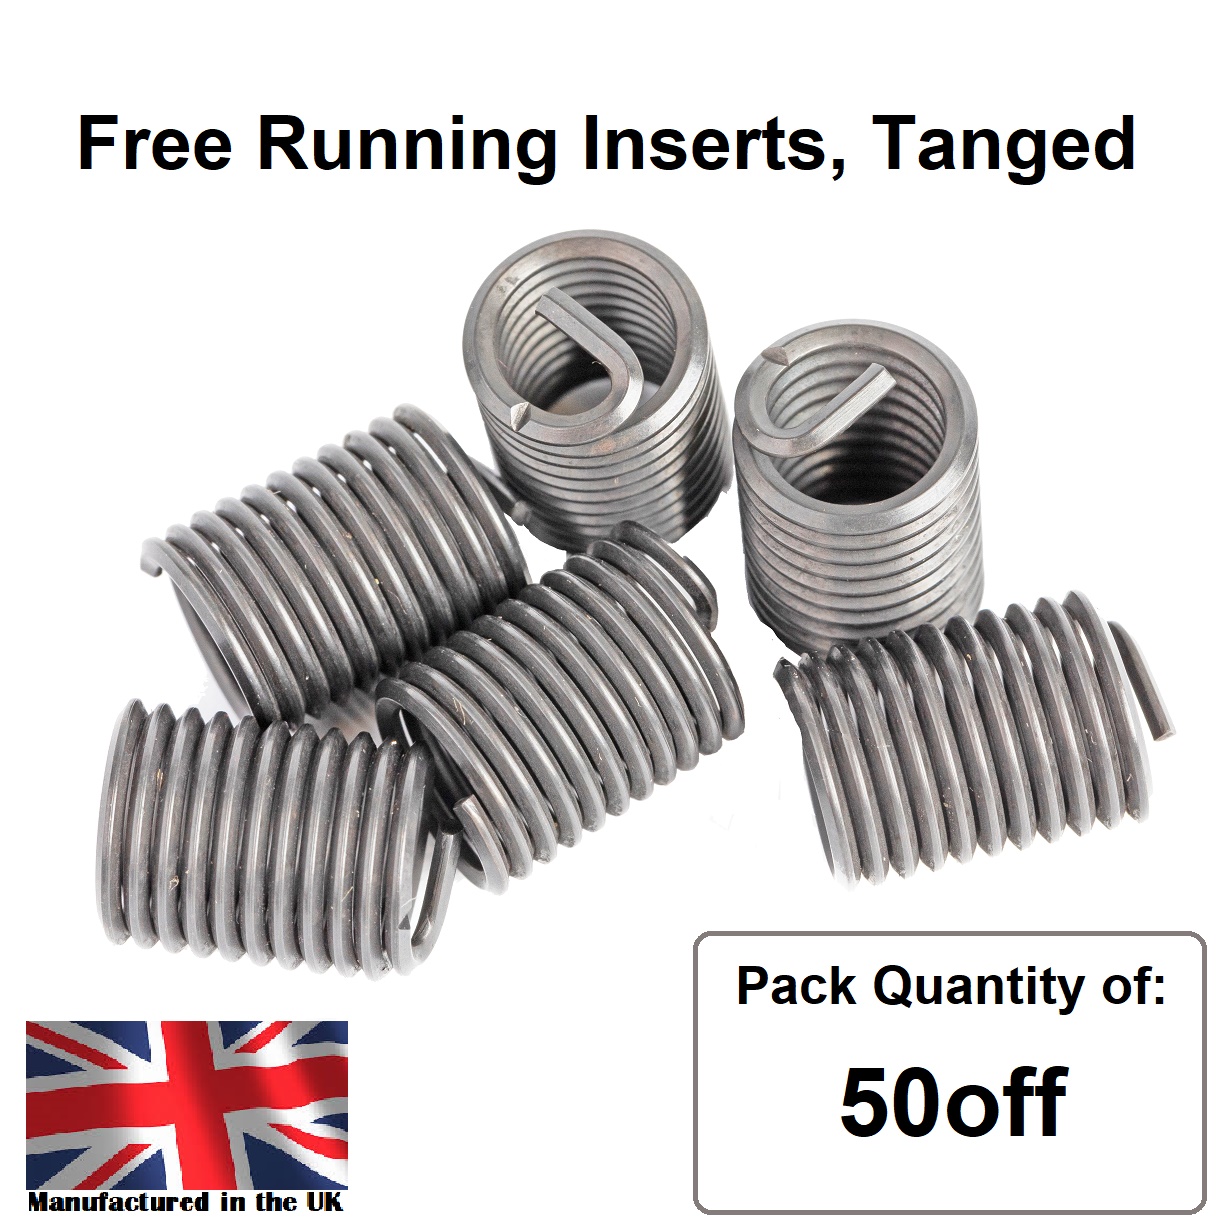 M2.5 x 0.45 x 1.5D Metric Coarse, Free Running, Tanged, Wire Thread Repair Insert, 304/A2 Stainless (Pack 50)